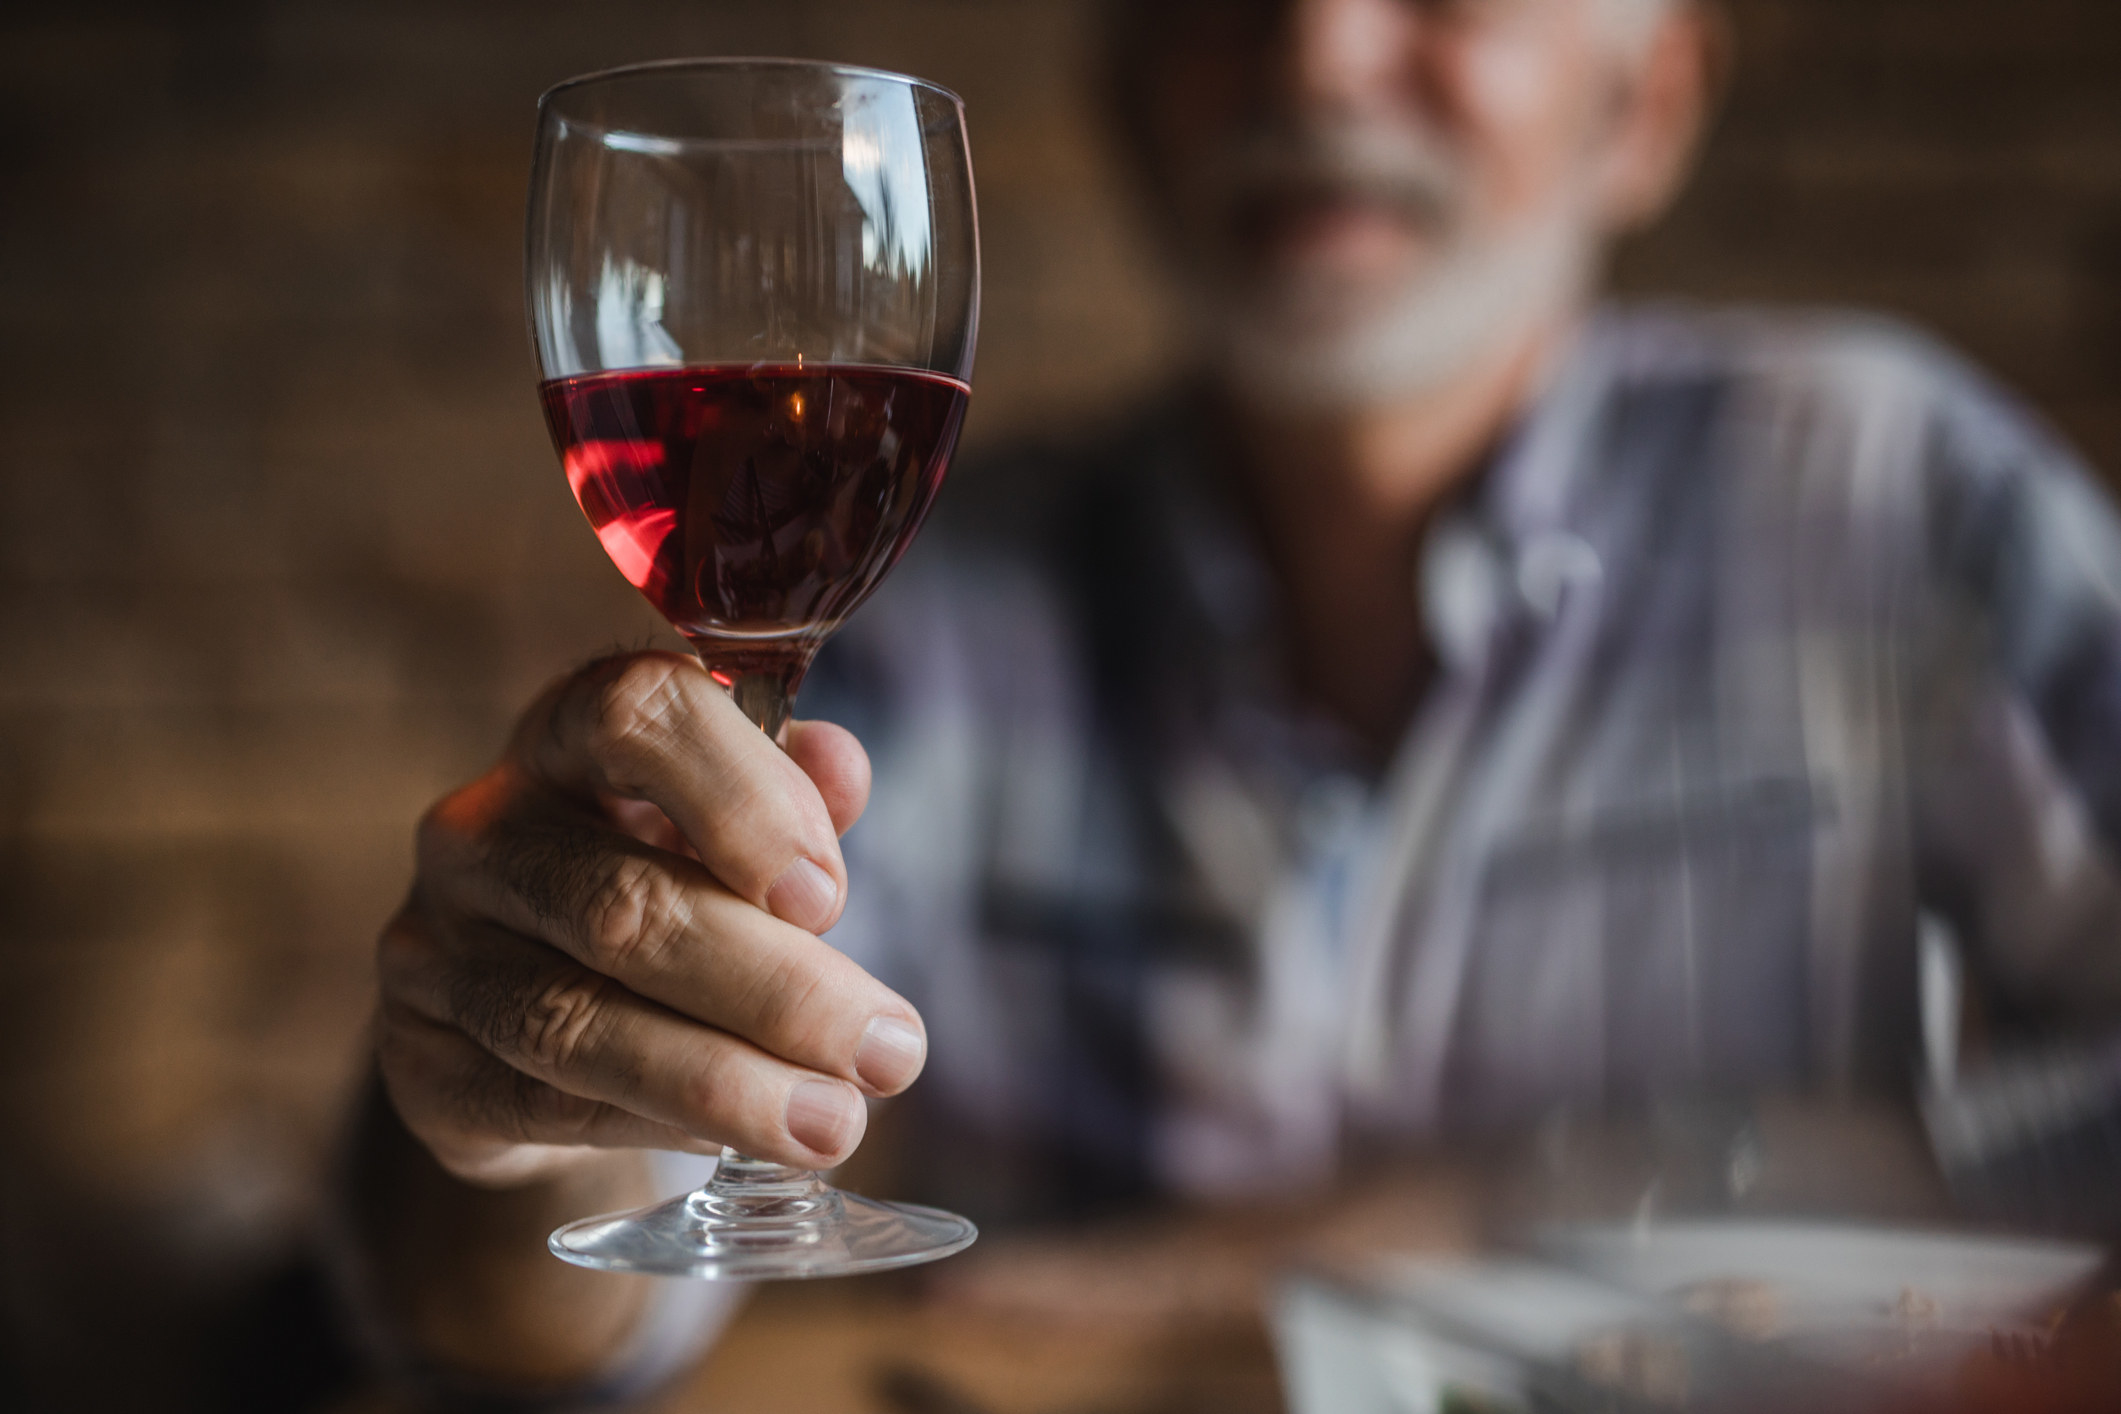 Man holds a glass of wine